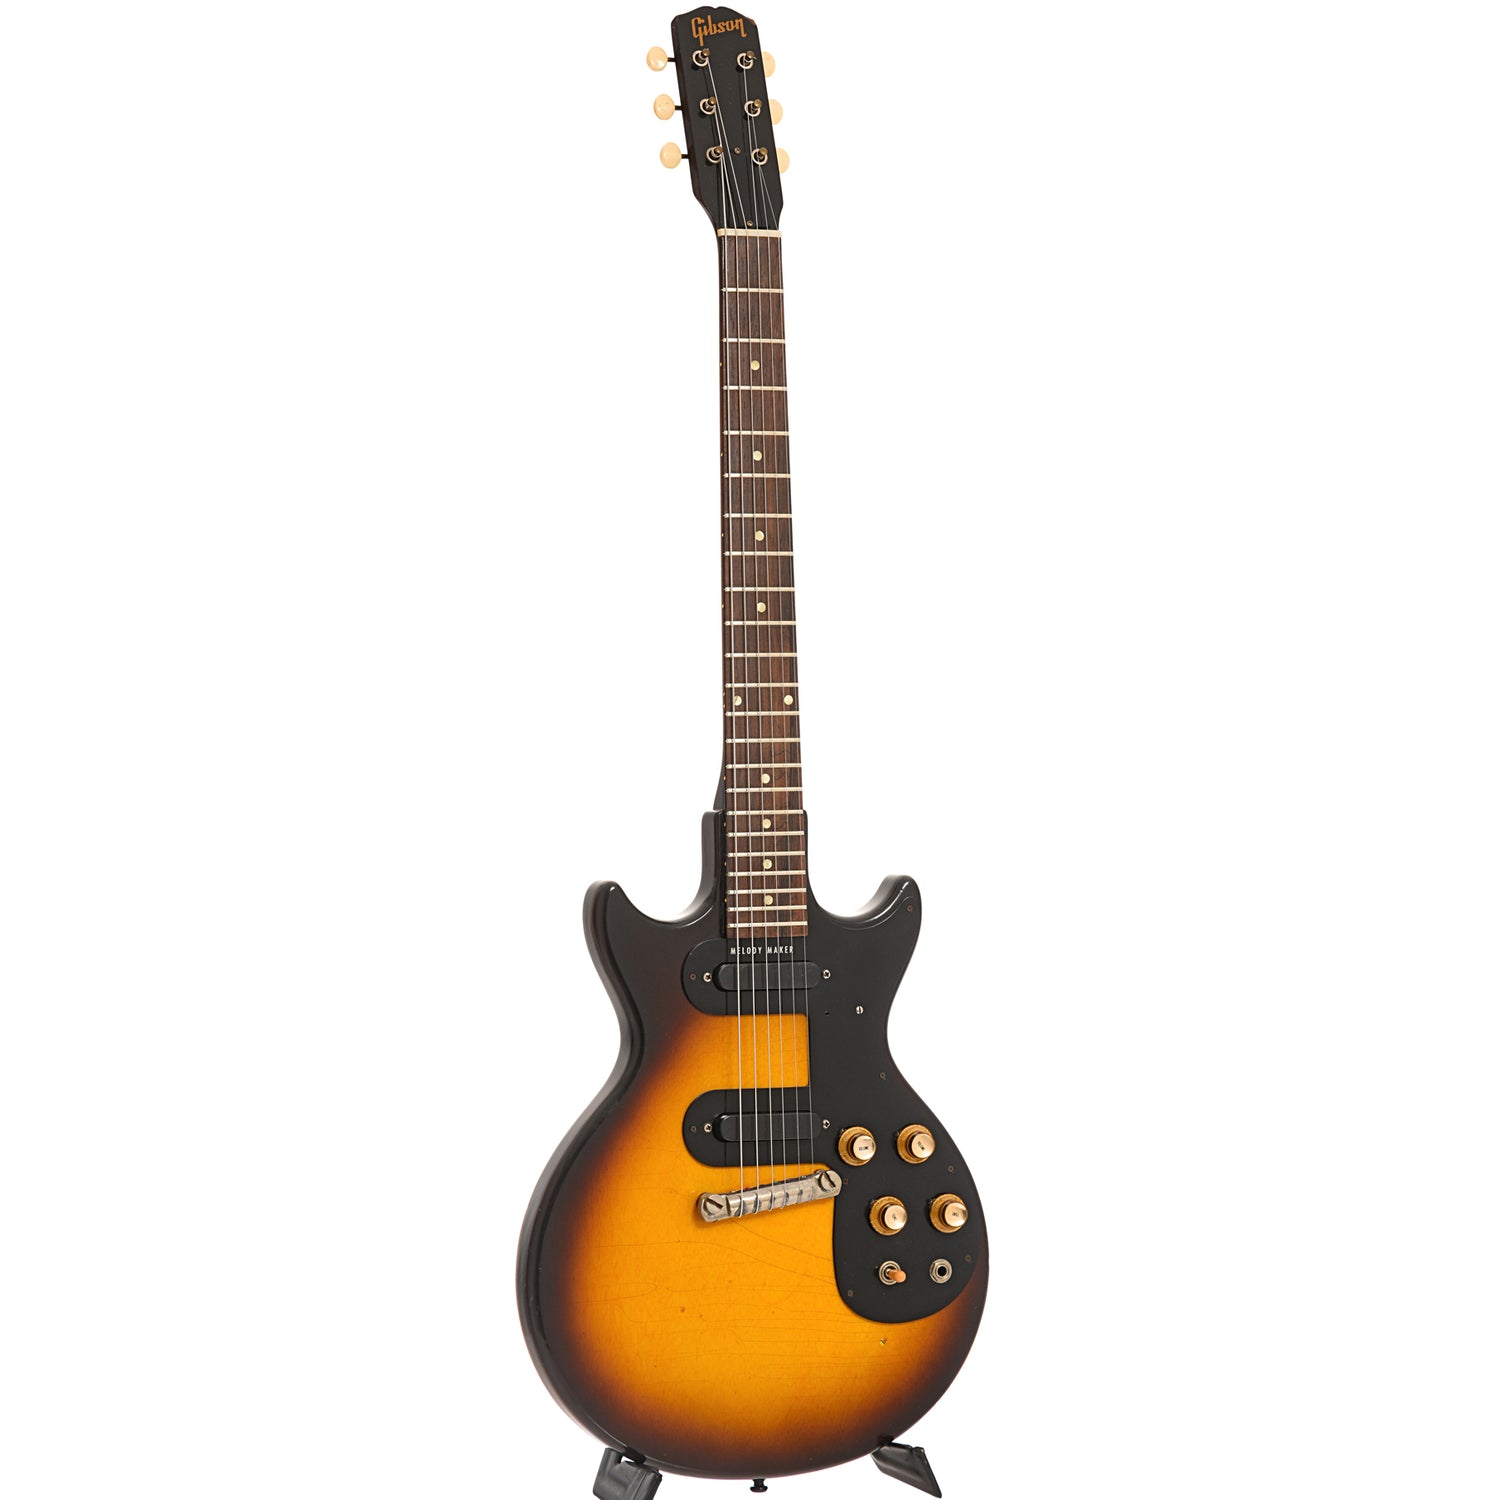 Full front and side of Gibson Melody Maker D